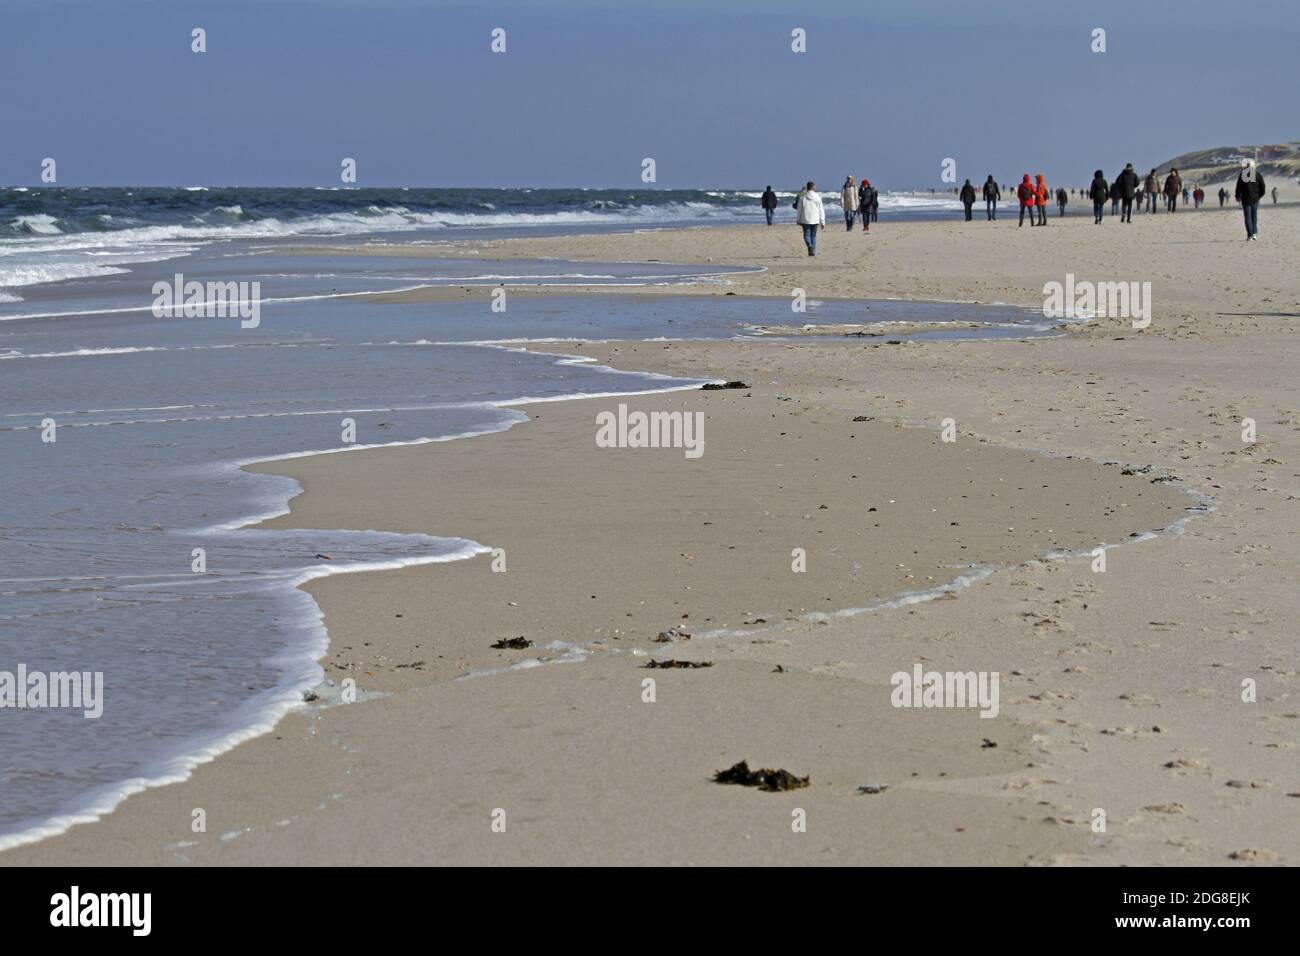 Walkers on the beach of Westerland, Sylt, Germany Stock Photo